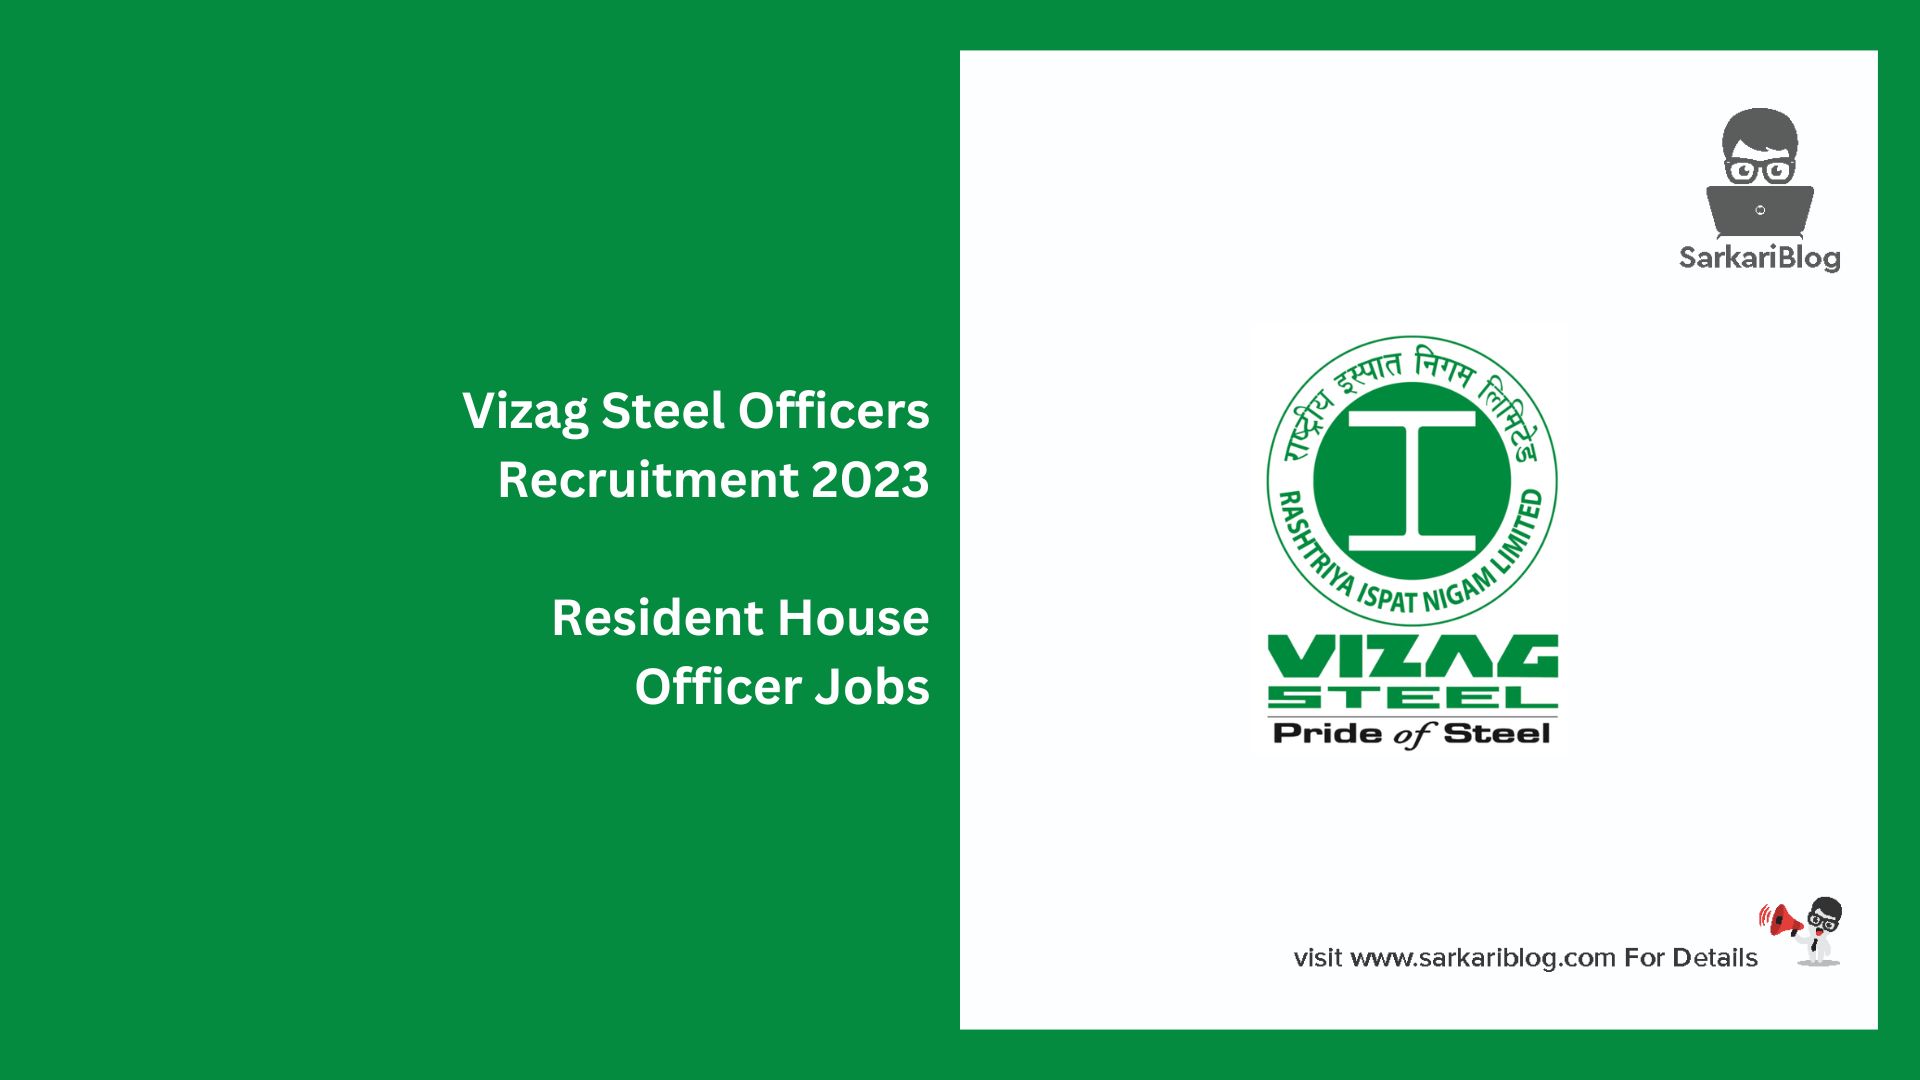 Vizag Steel Officers Recruitment 2023